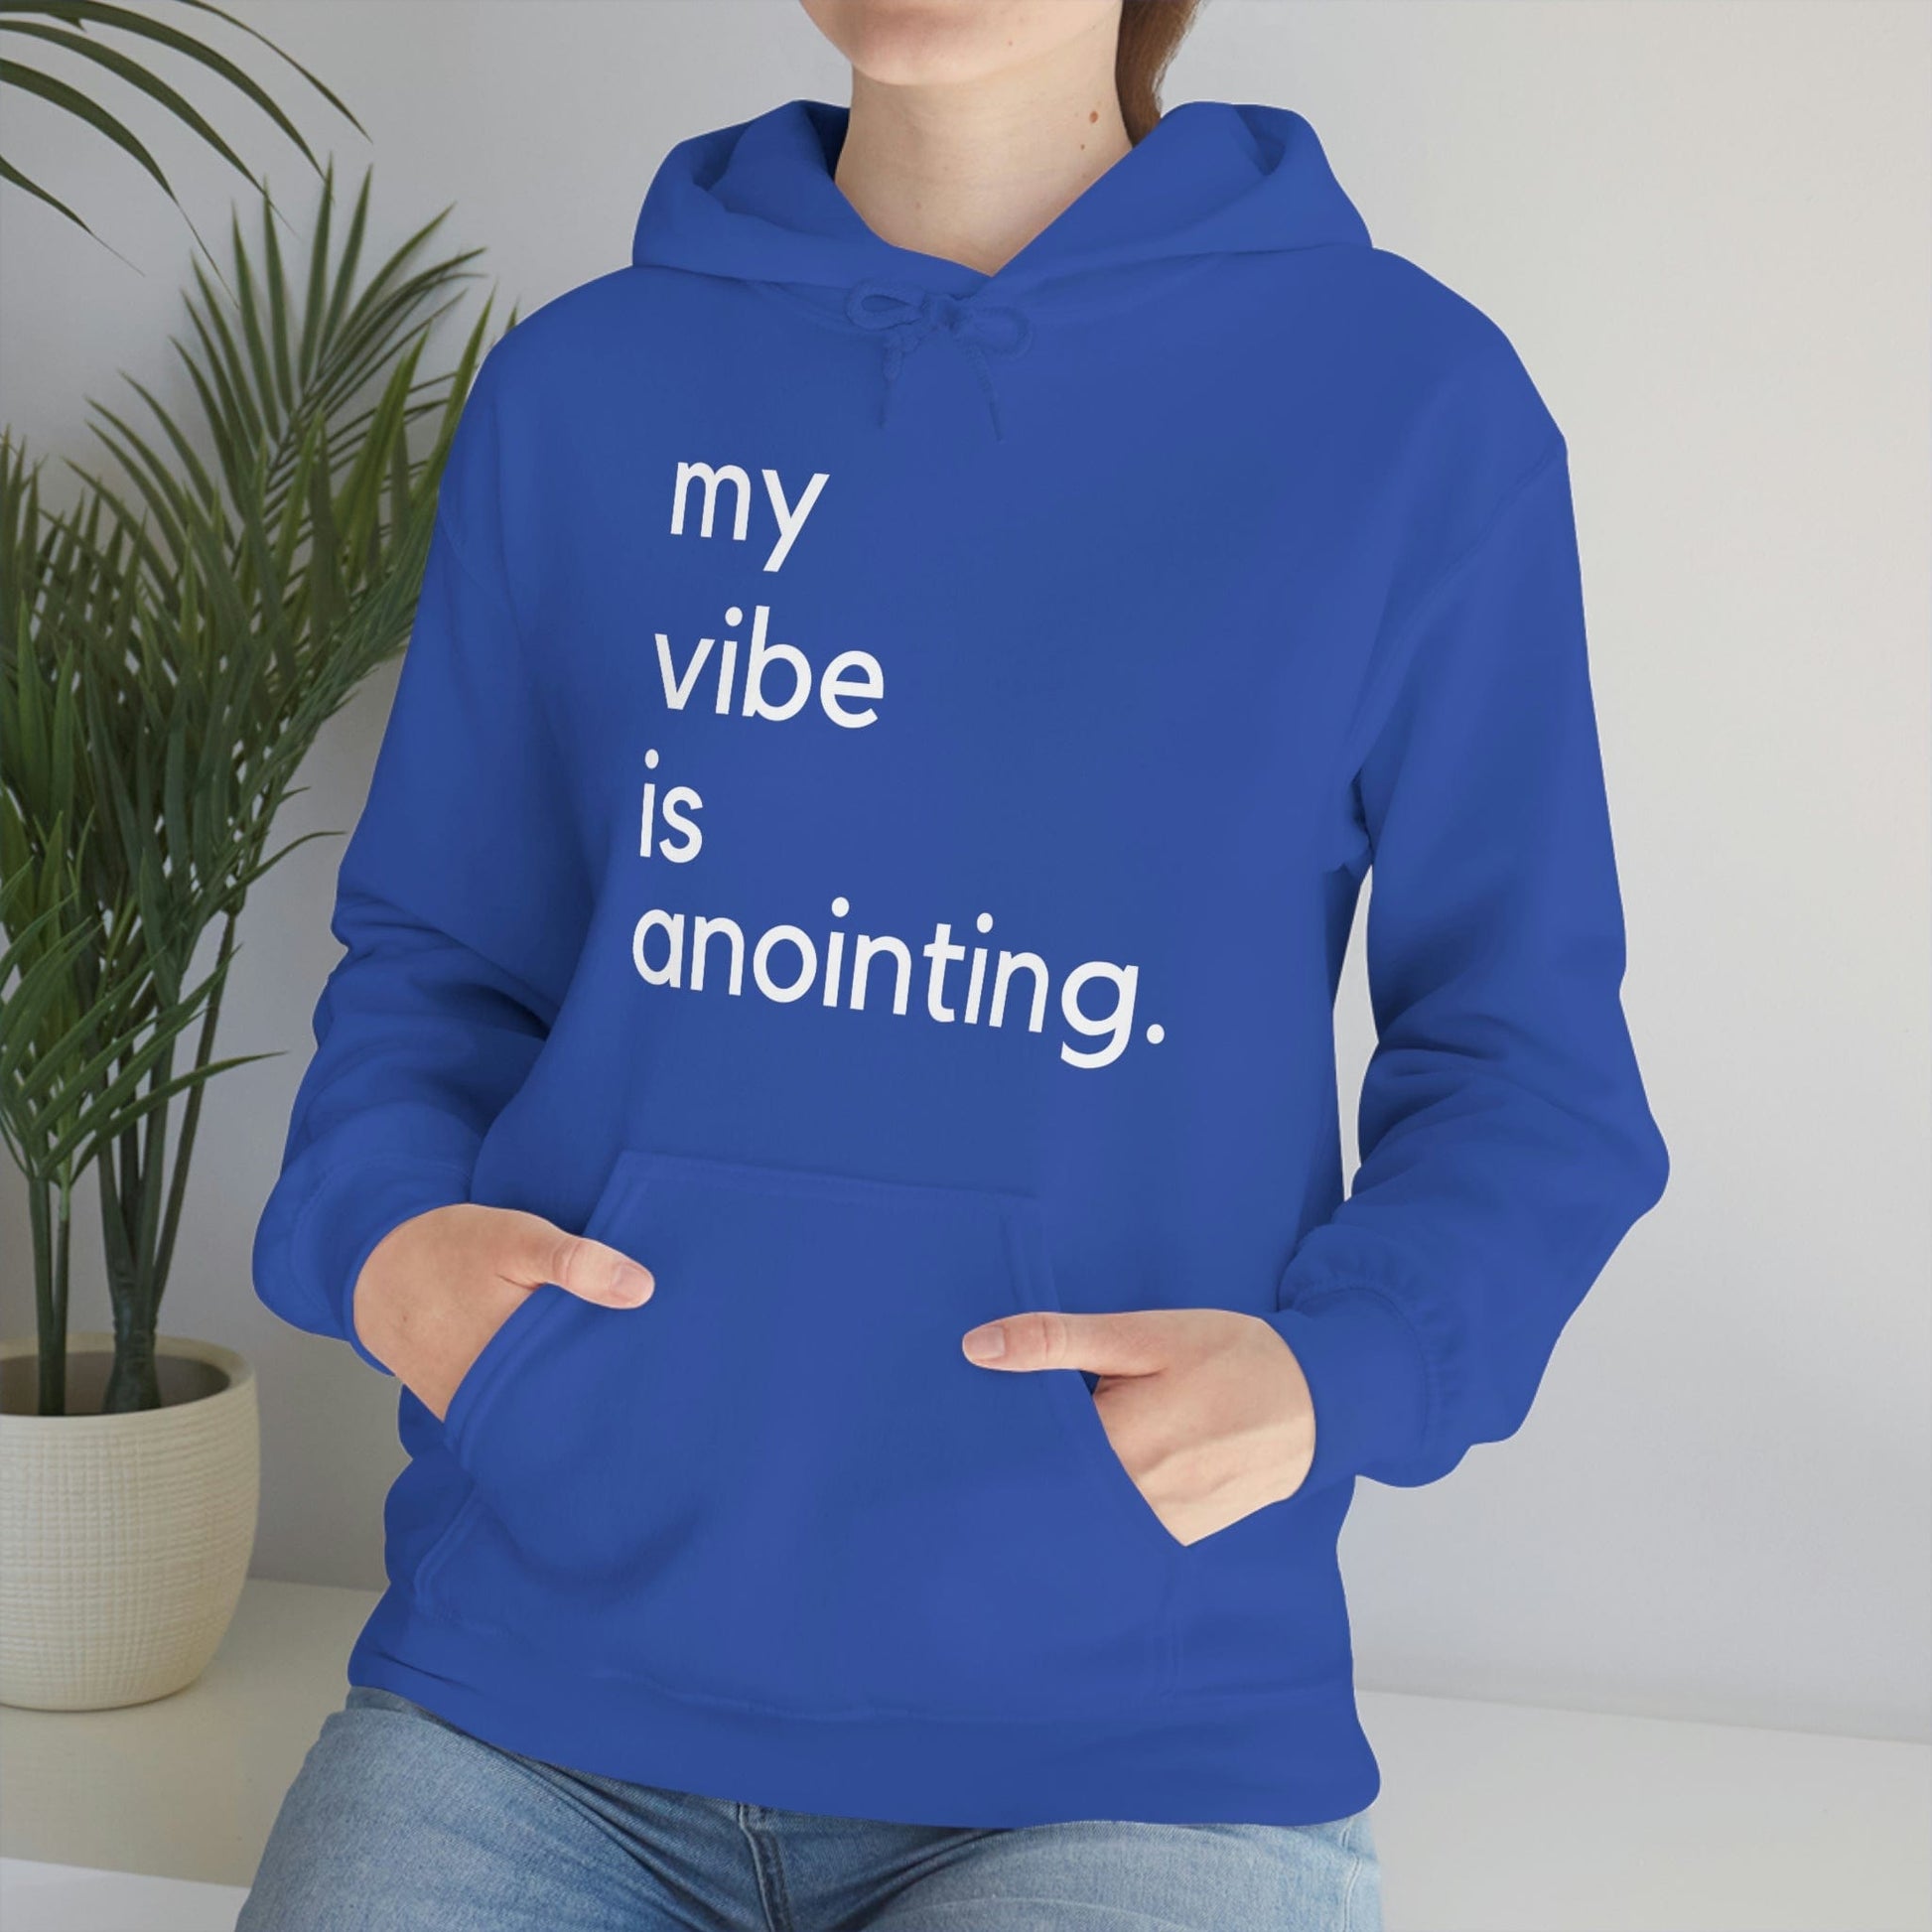 I'm anointed, anointed by God, Serving God, Living for God, The Presence of God is Upon Me, Christian Apparel, Faith Apparel, Faith Hoodie